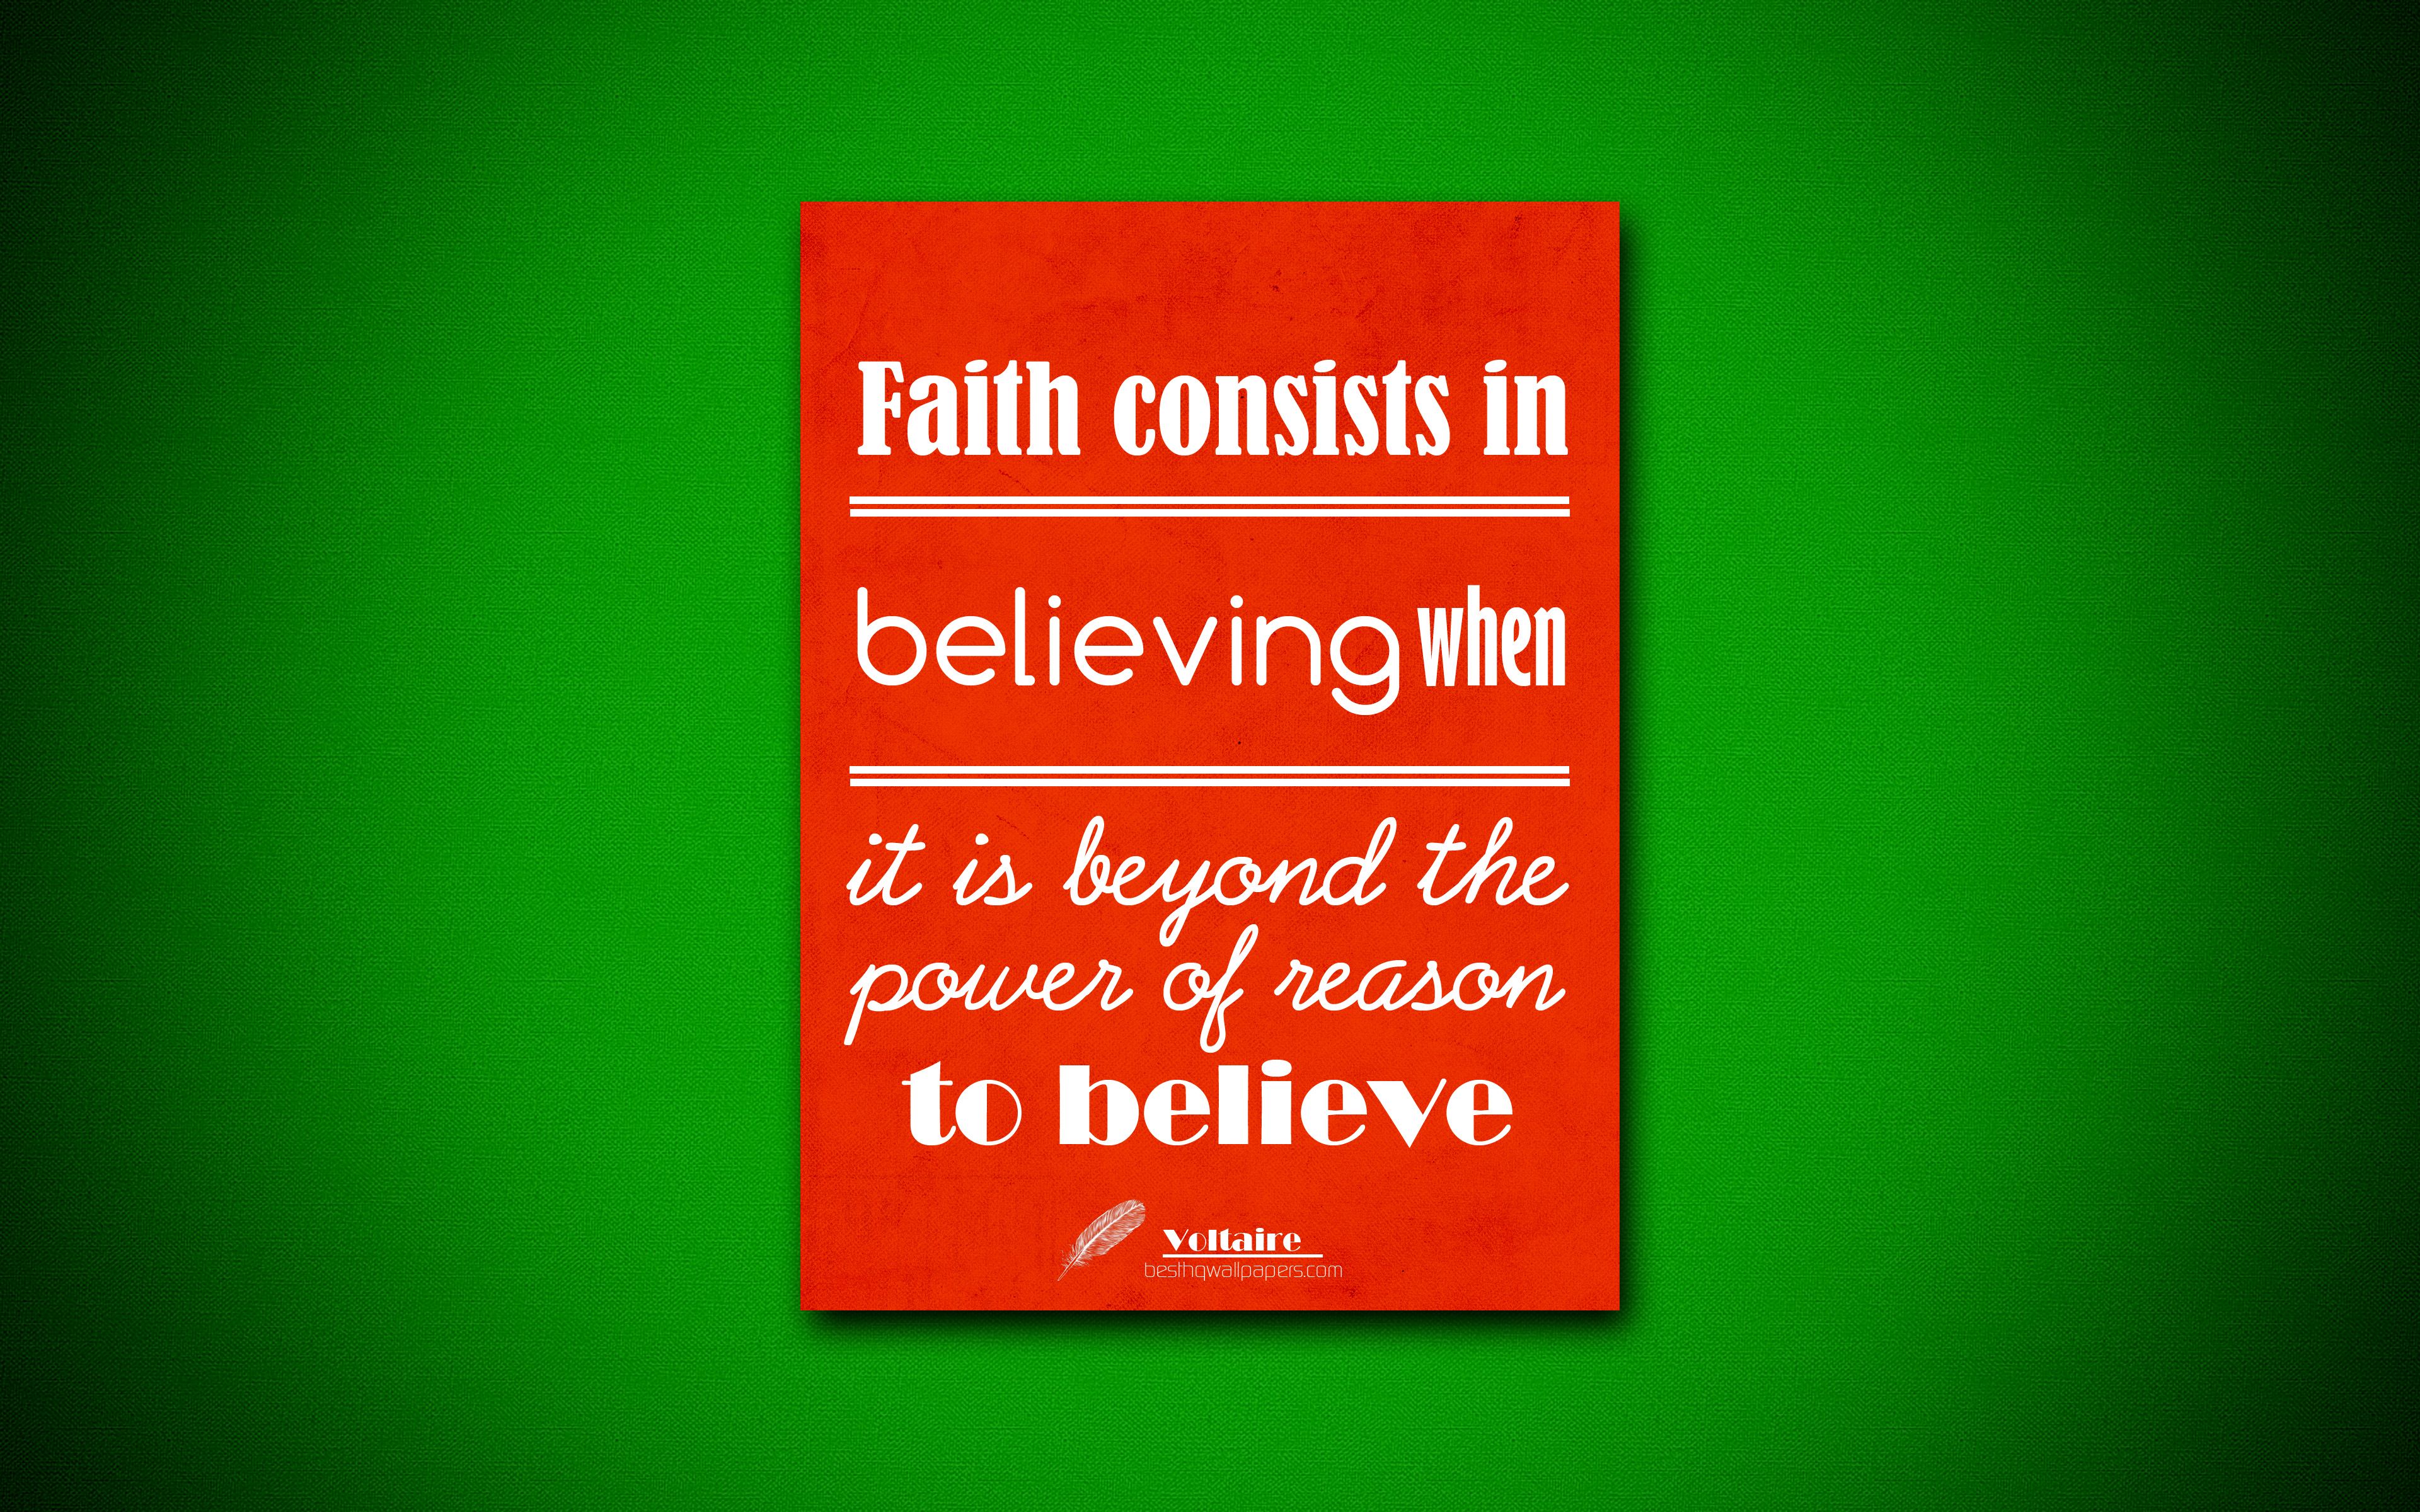 Download wallpaper 4k, Faith consists in believing when it is